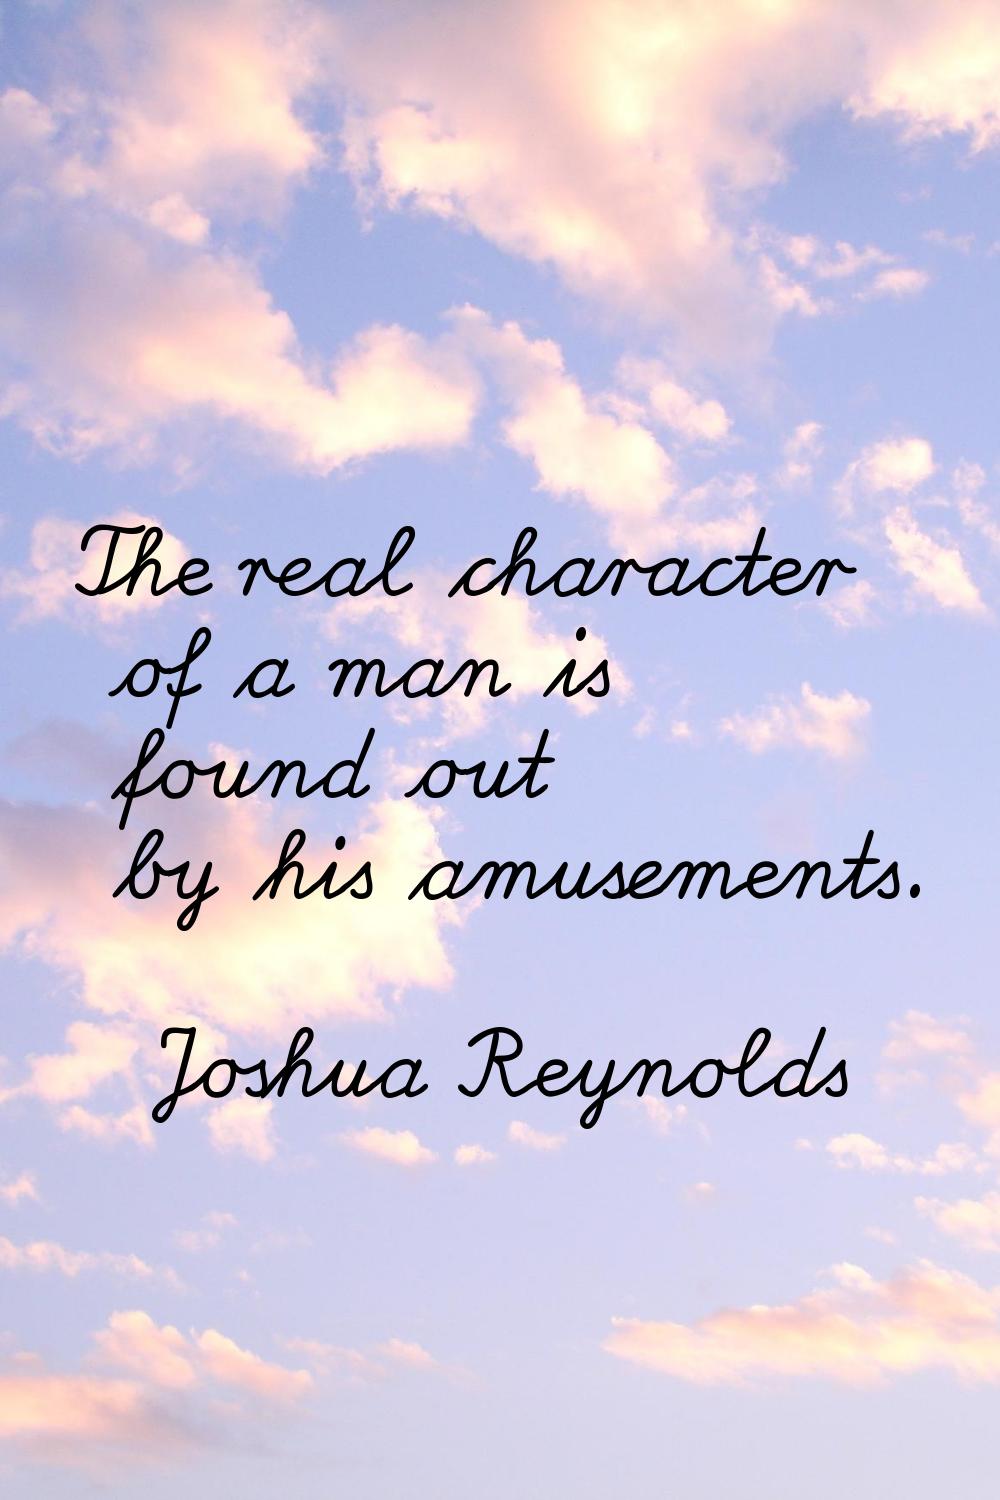 The real character of a man is found out by his amusements.